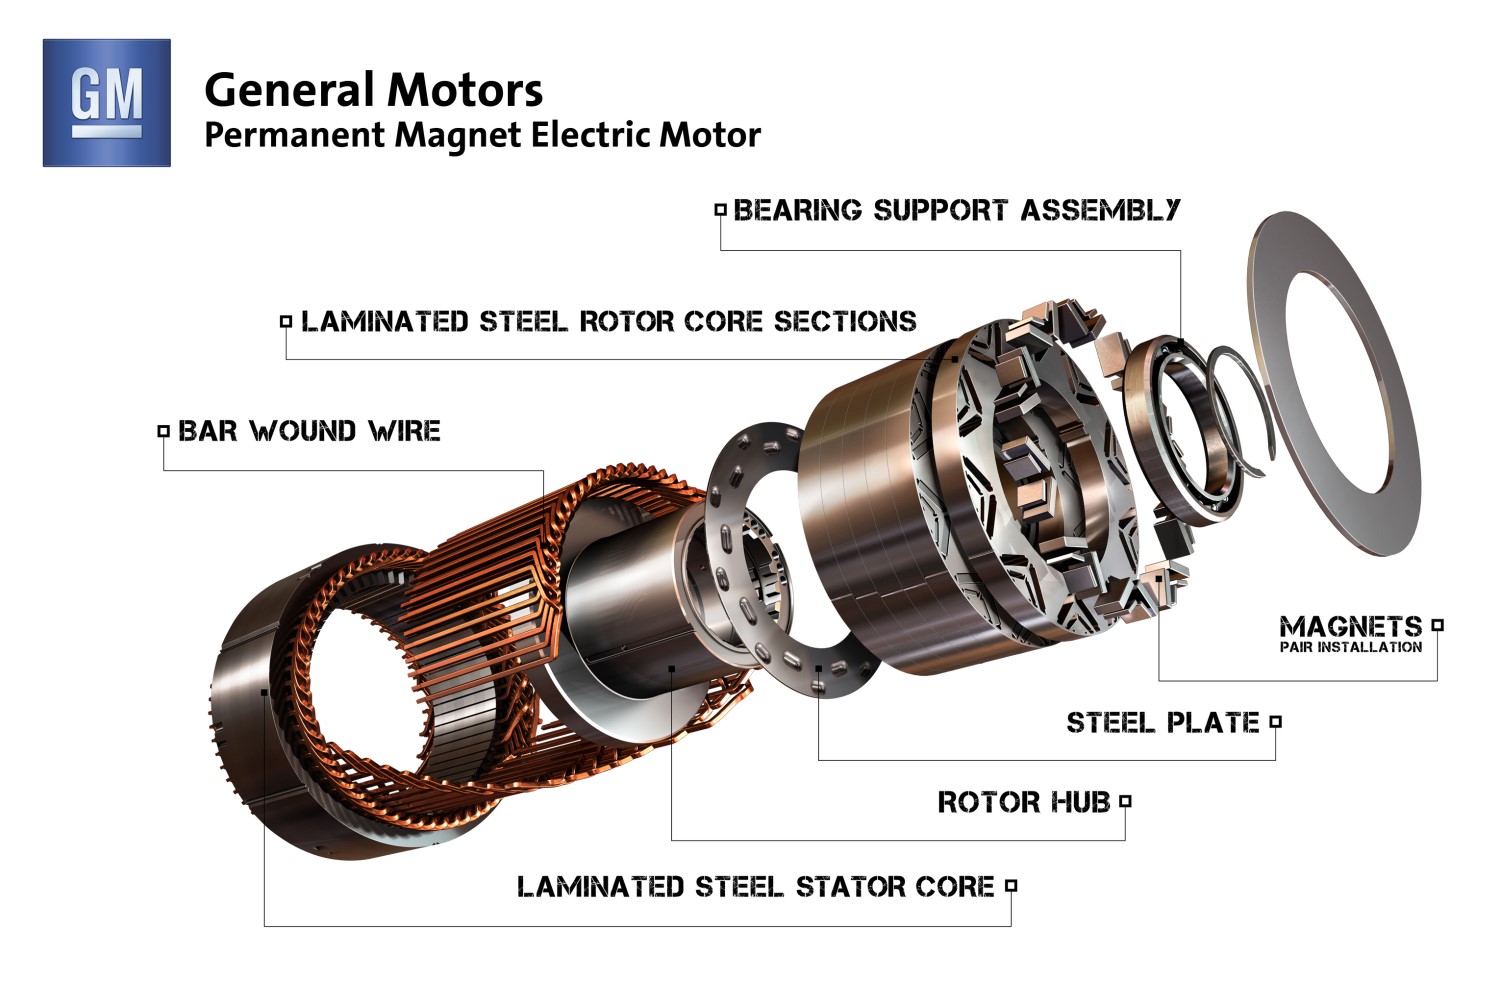 One of Chevy's electric motors